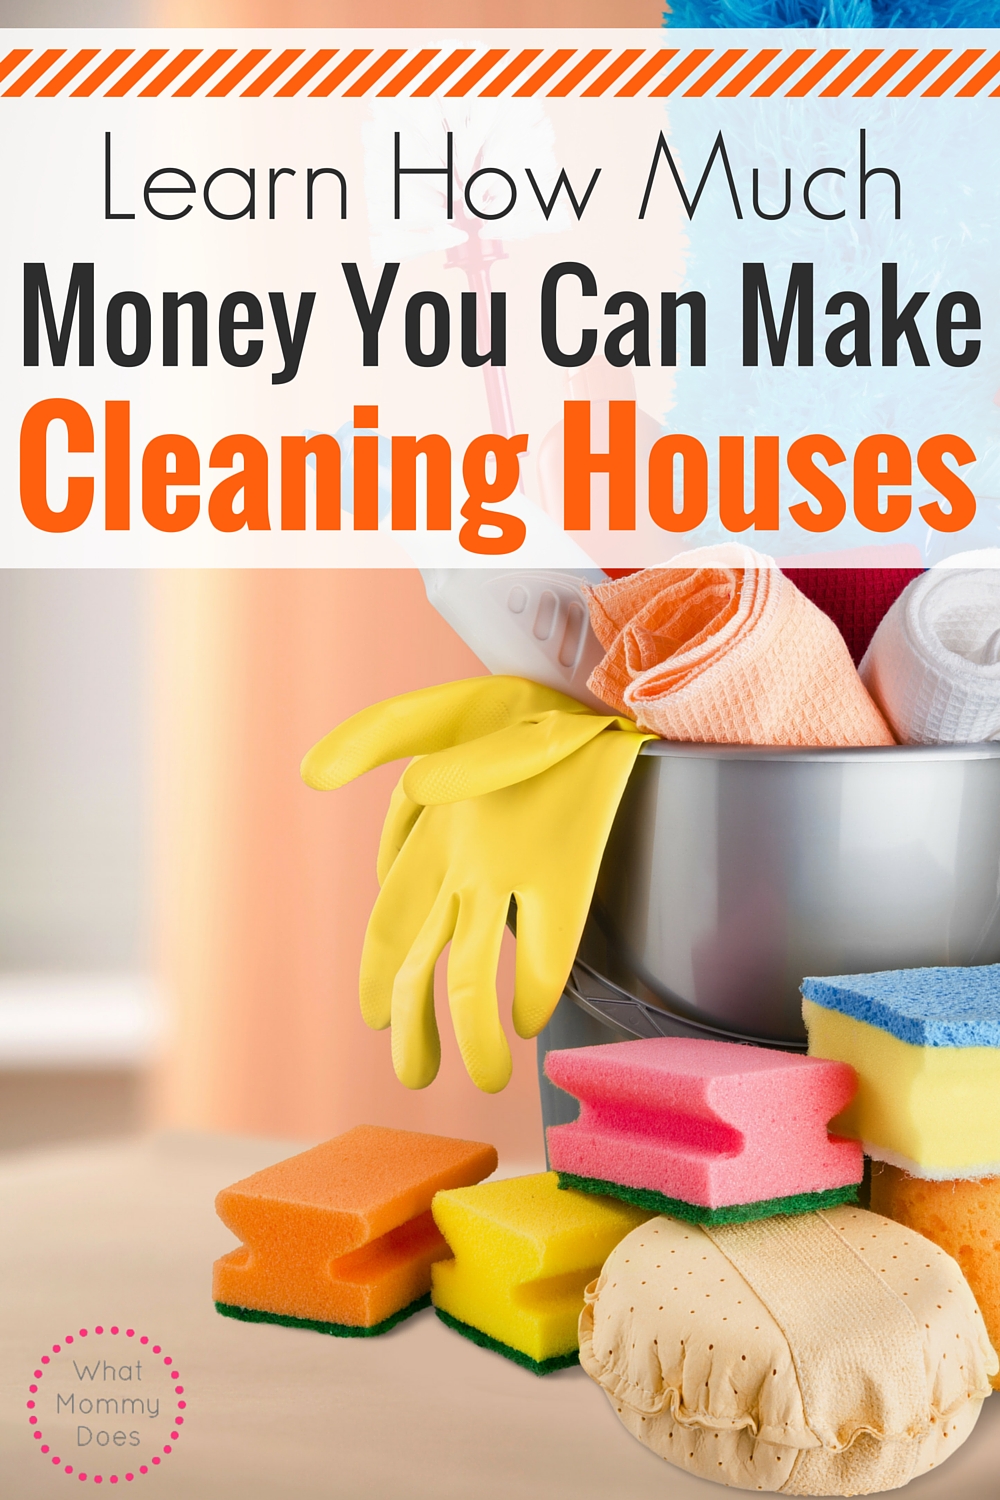 Make Money Cleaning Houses - A great guide to starting a lucrative side hustle by cleaning houses!